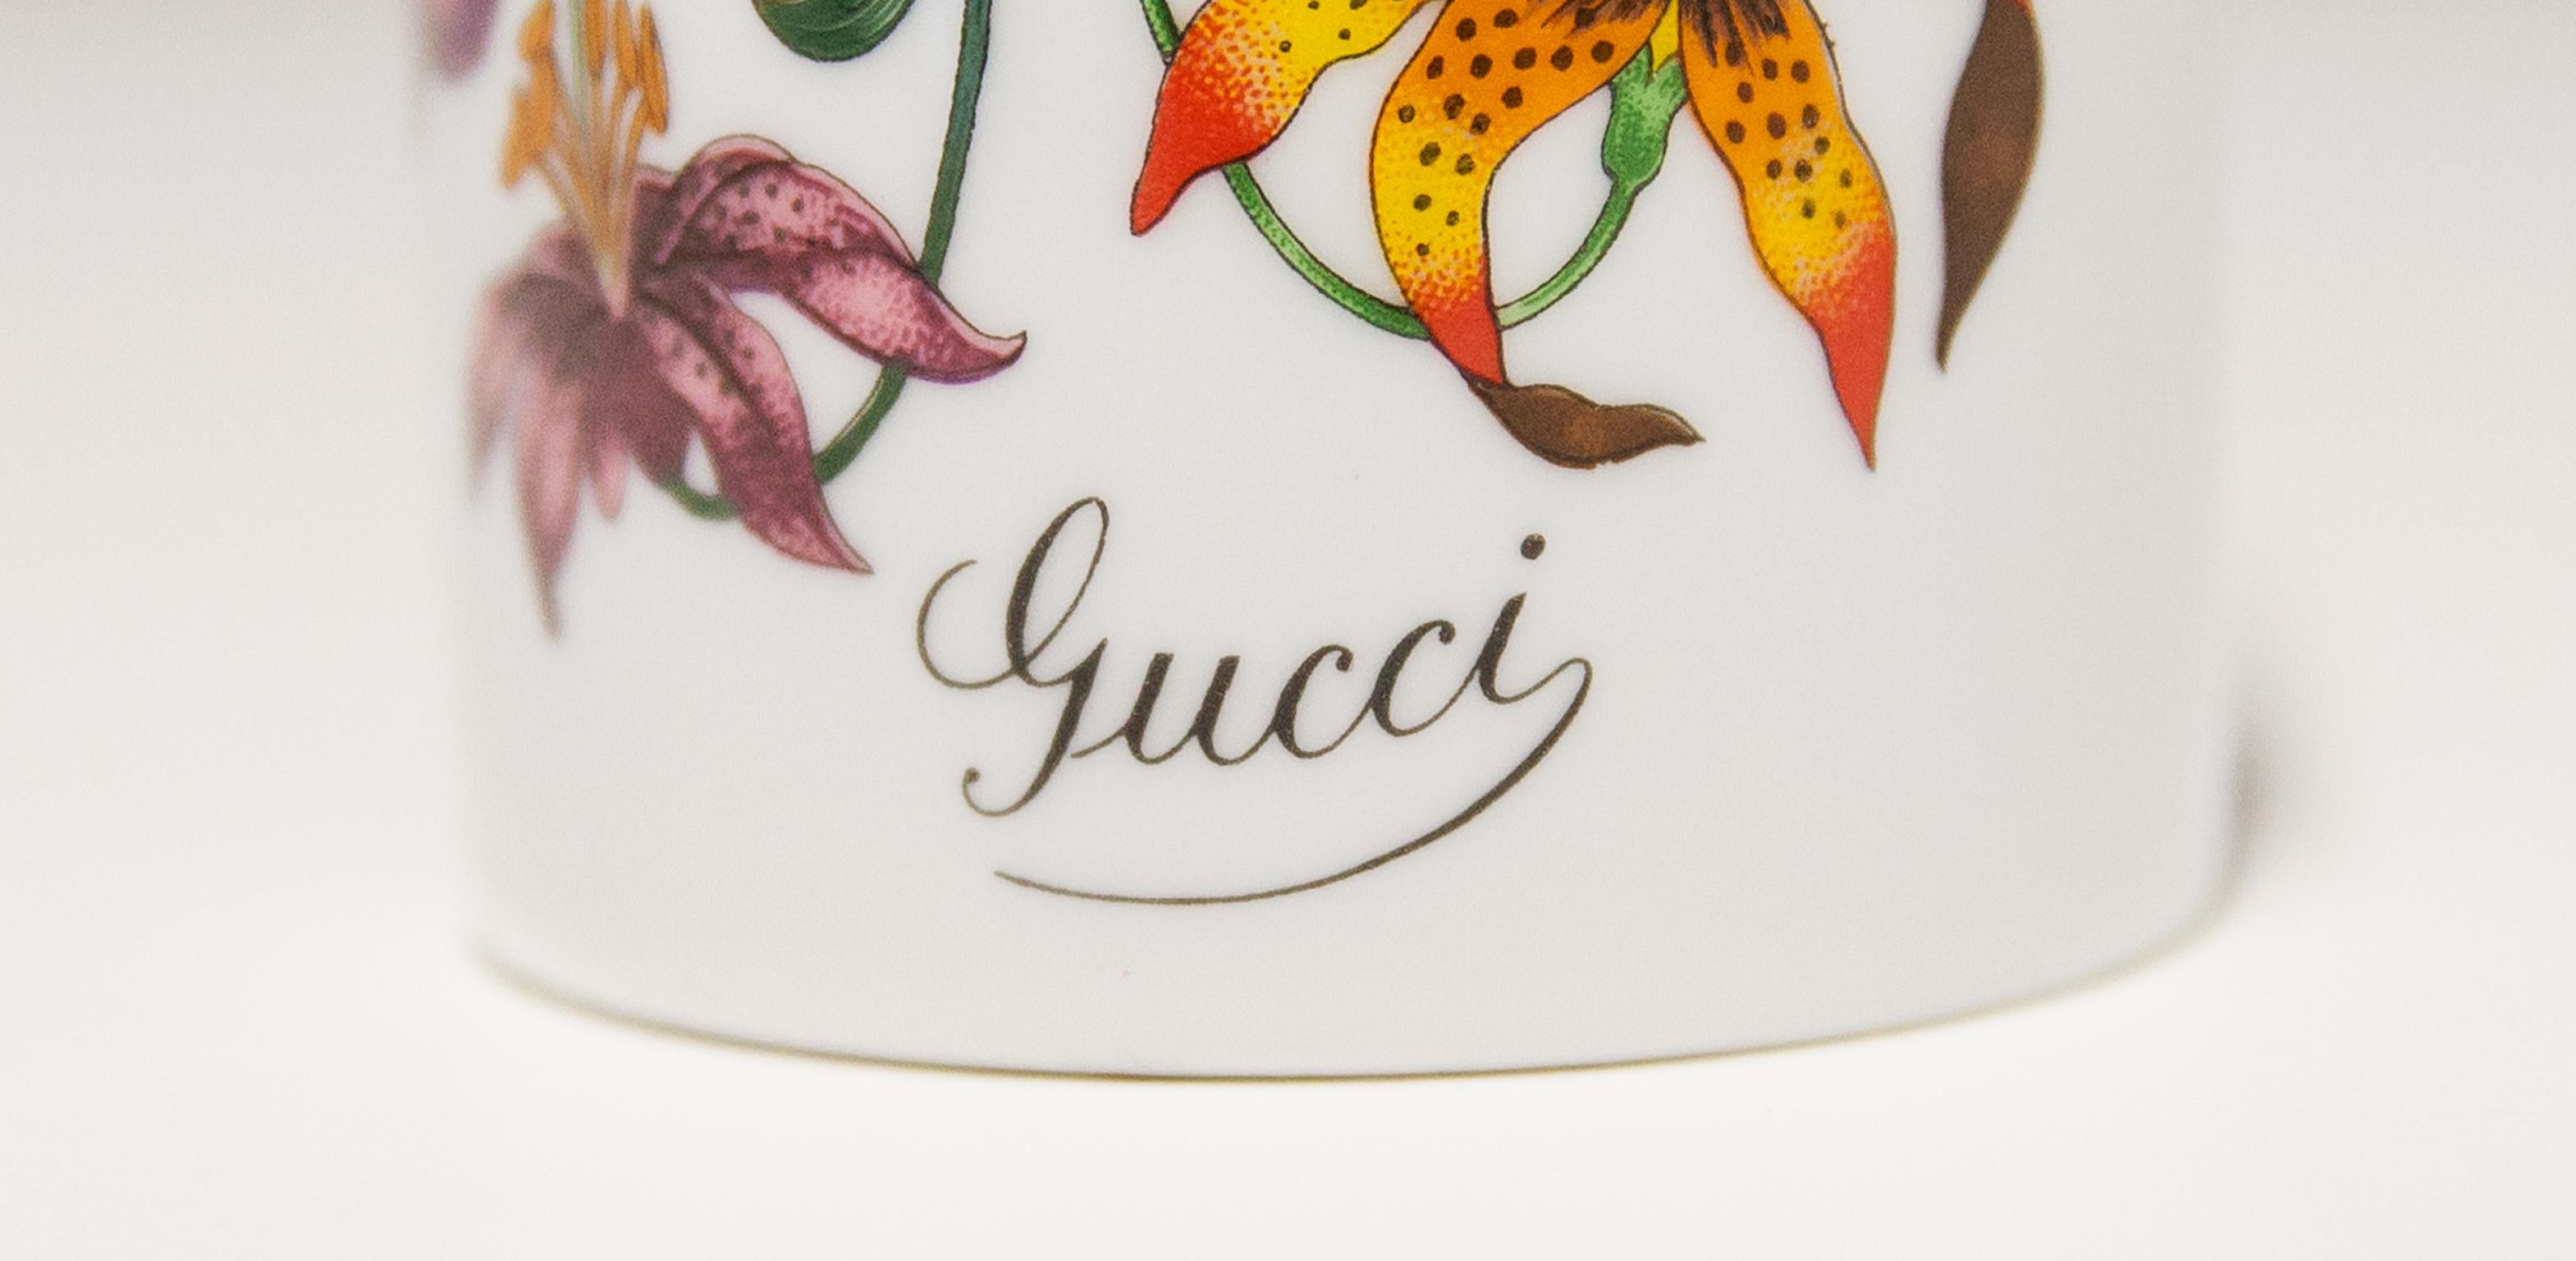 Gucci Vintage Porcelain Toothbrush Mug Richard Ginori 1970s In Good Condition For Sale In Munich, DE